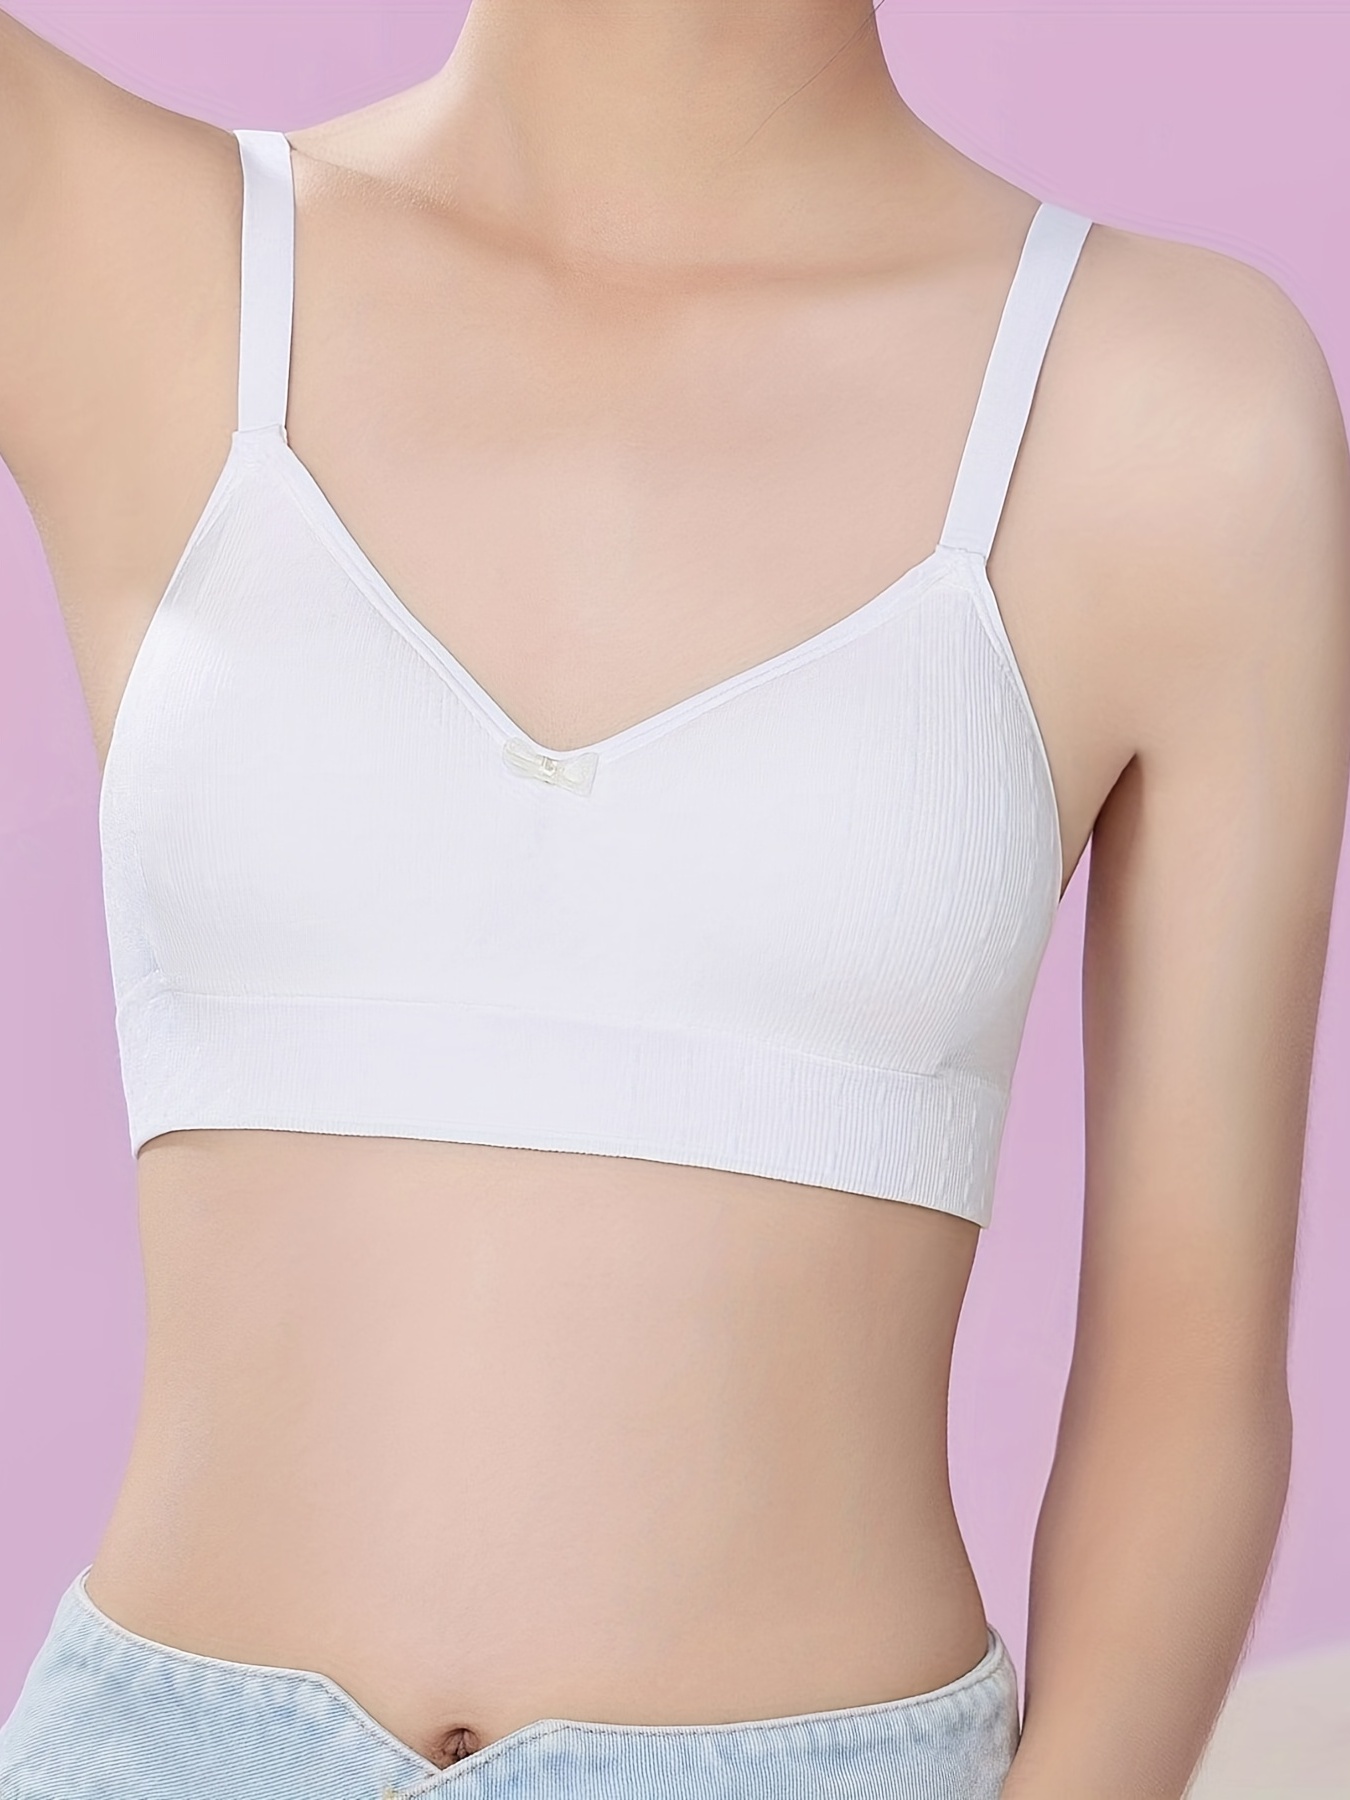 Where to find a Push Up Bra Top for your Young Child 